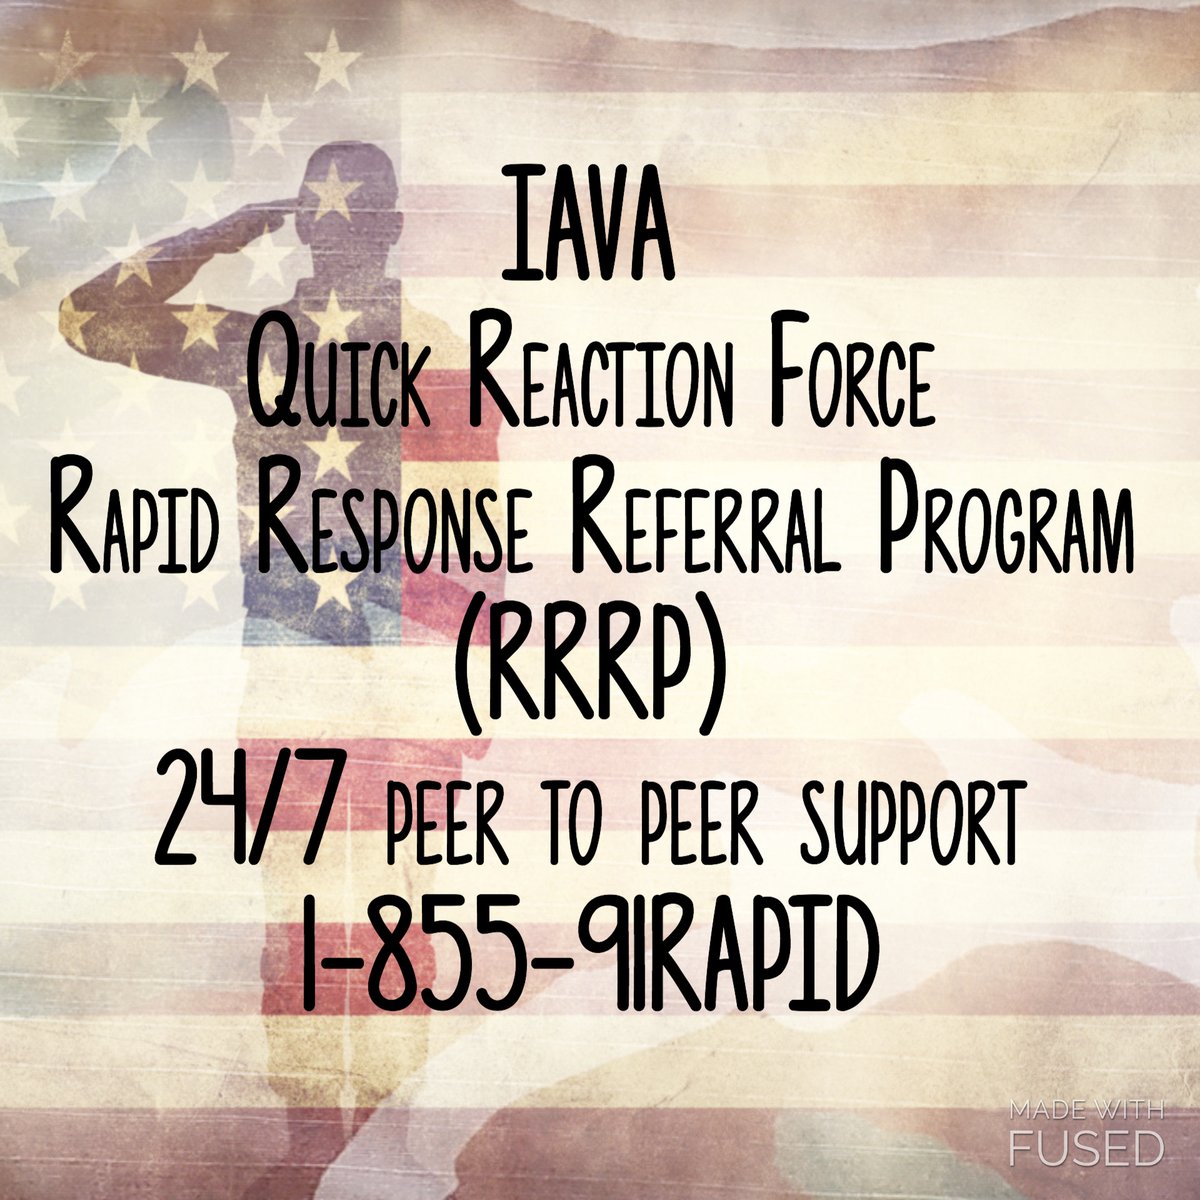 4/ IAVA’s Quick Reaction Force, a Rapid Response Referral Program, provides confidential 24/7 peer to peer support, comprehensive care management and resource connections.To get connected to a Veteran Care Manager today, please call 855-91RAPID or visit  http://www.QUICKREACTIONFORCE.org 